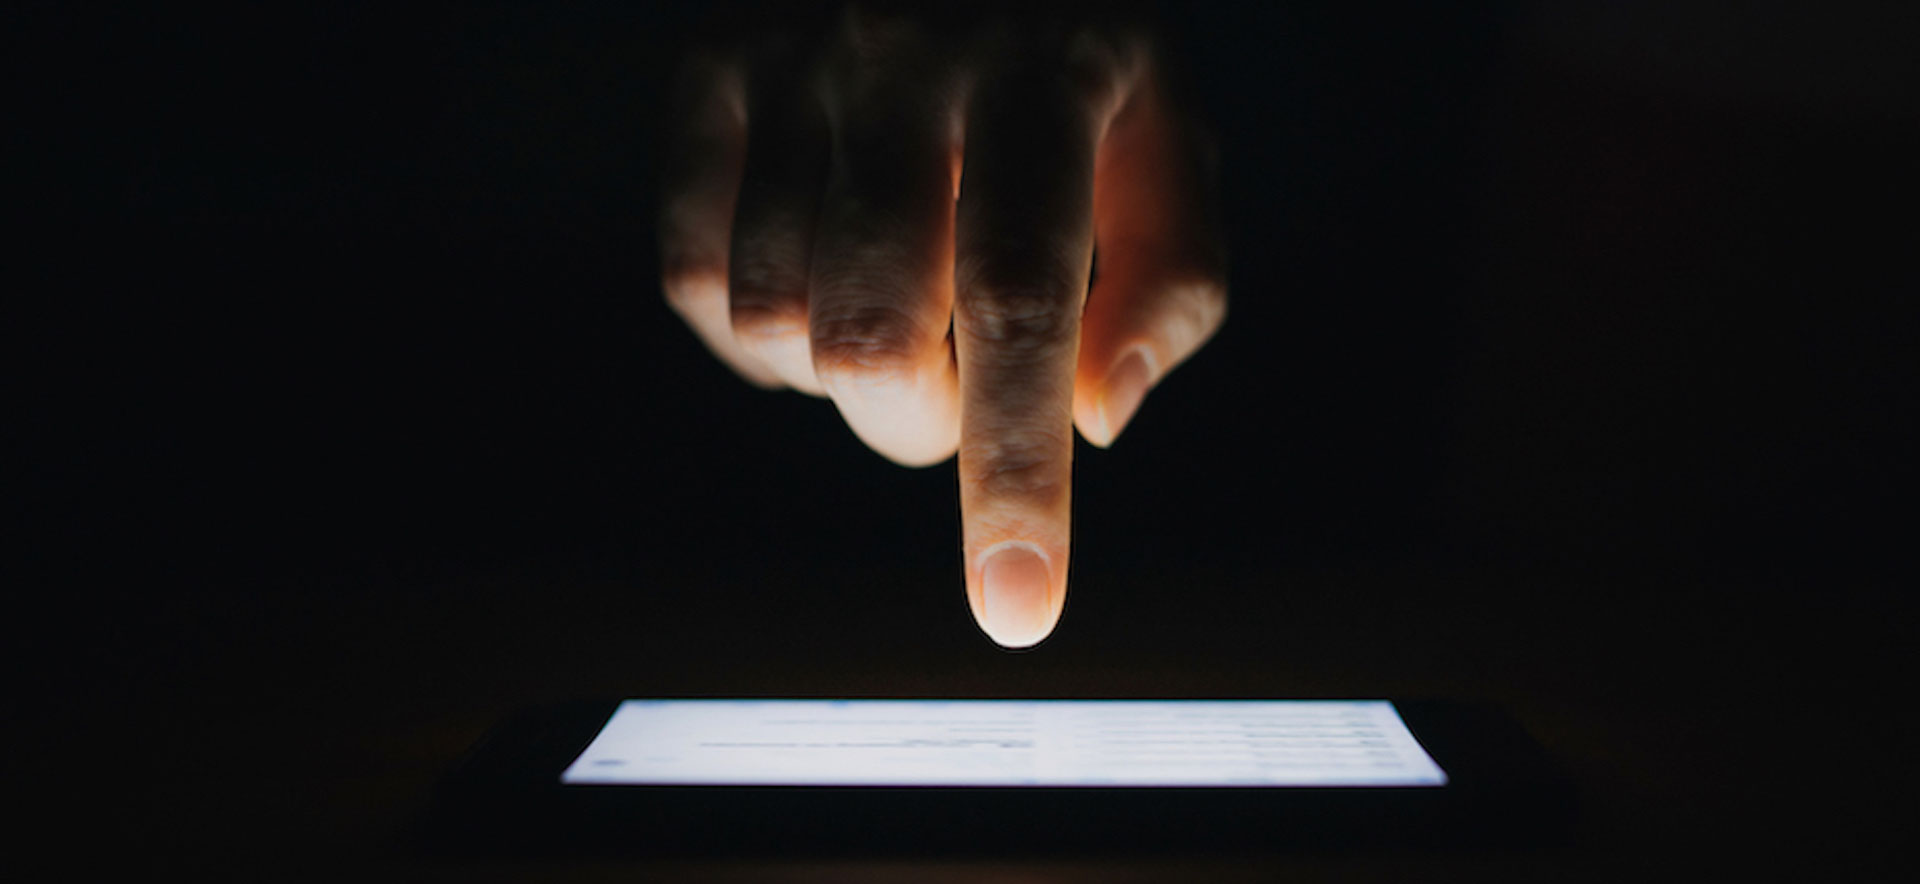 A finger pointed over a smart phone screen